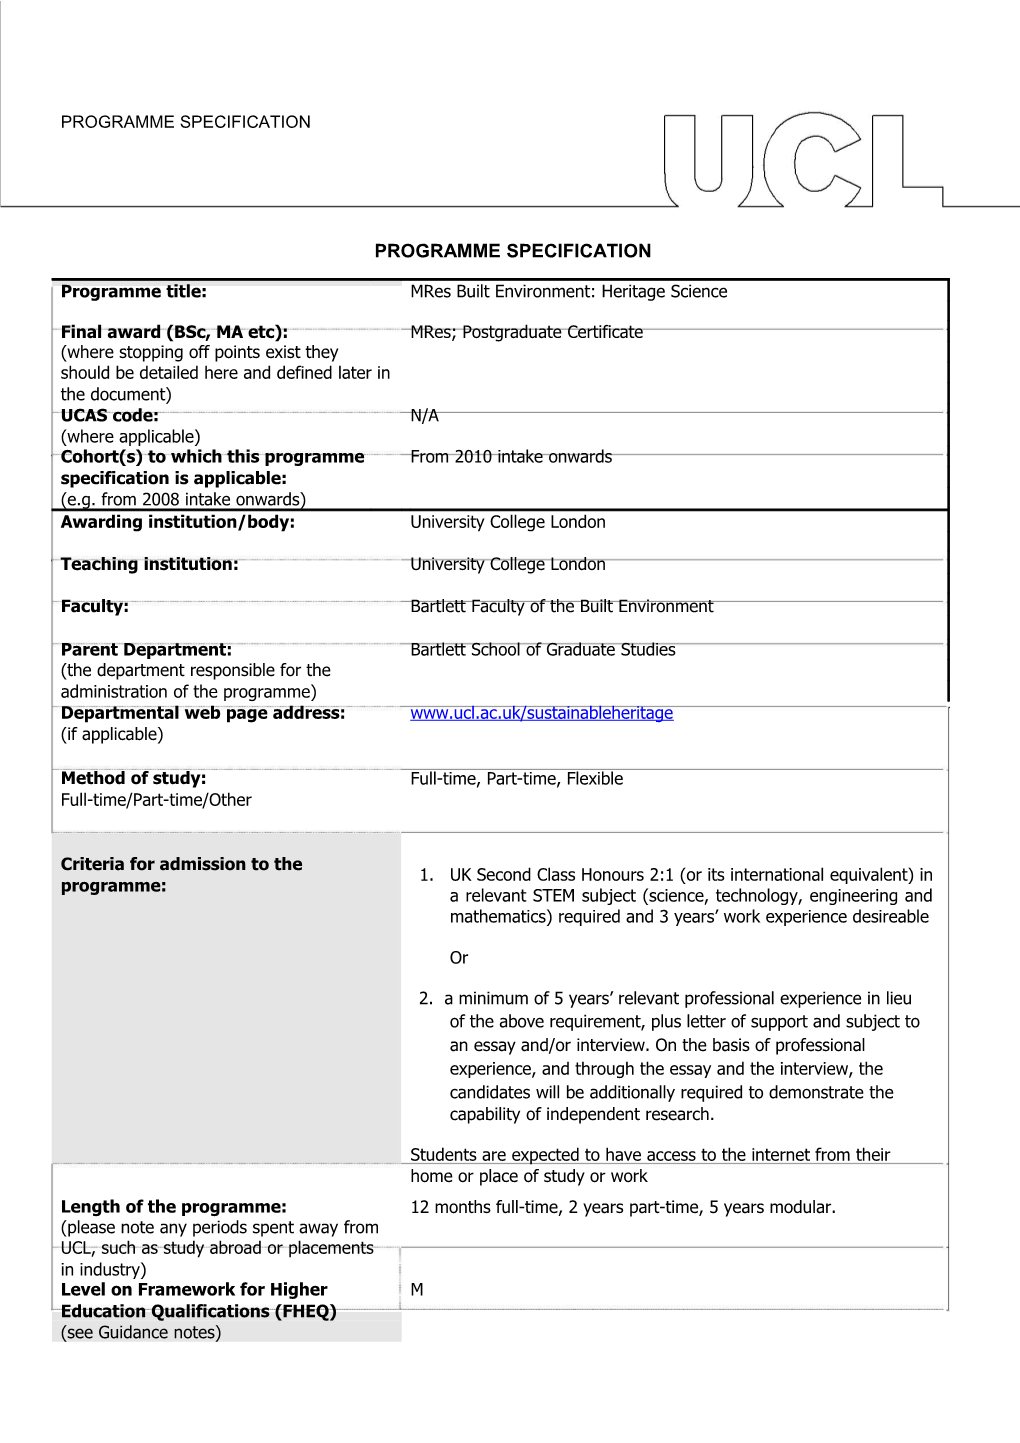 Criteria for Admission to the Programme